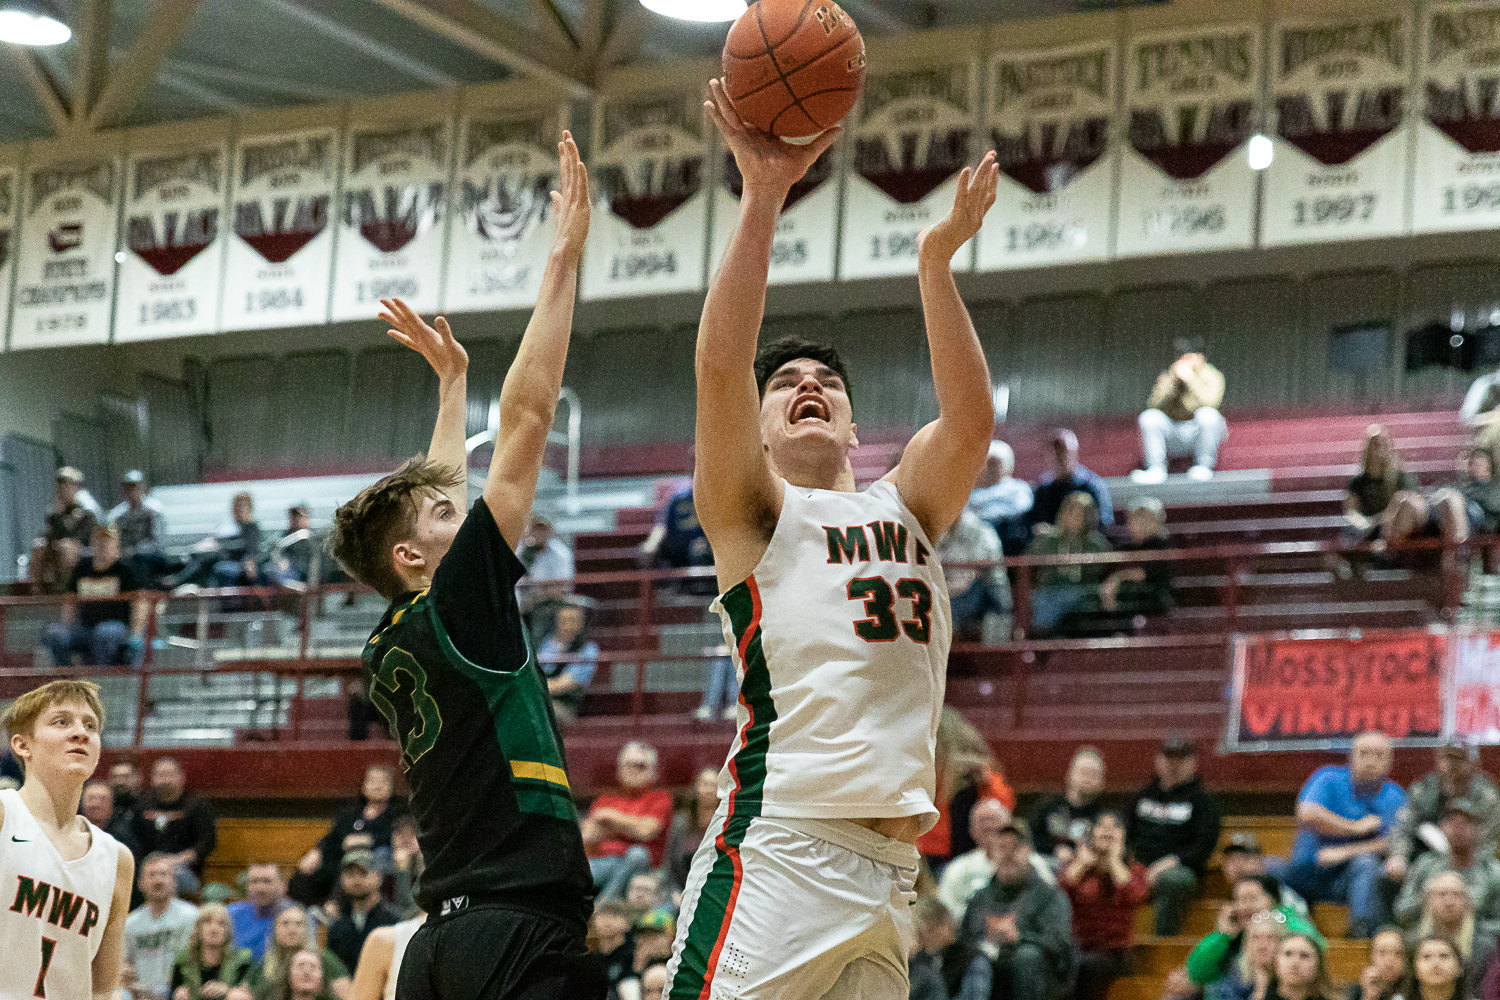 Morton-White Pass center Josh Salguero throws up a shot in an opening round of state matchup against Northwest Christian (Colbert) at W.F. West Feb. 25.